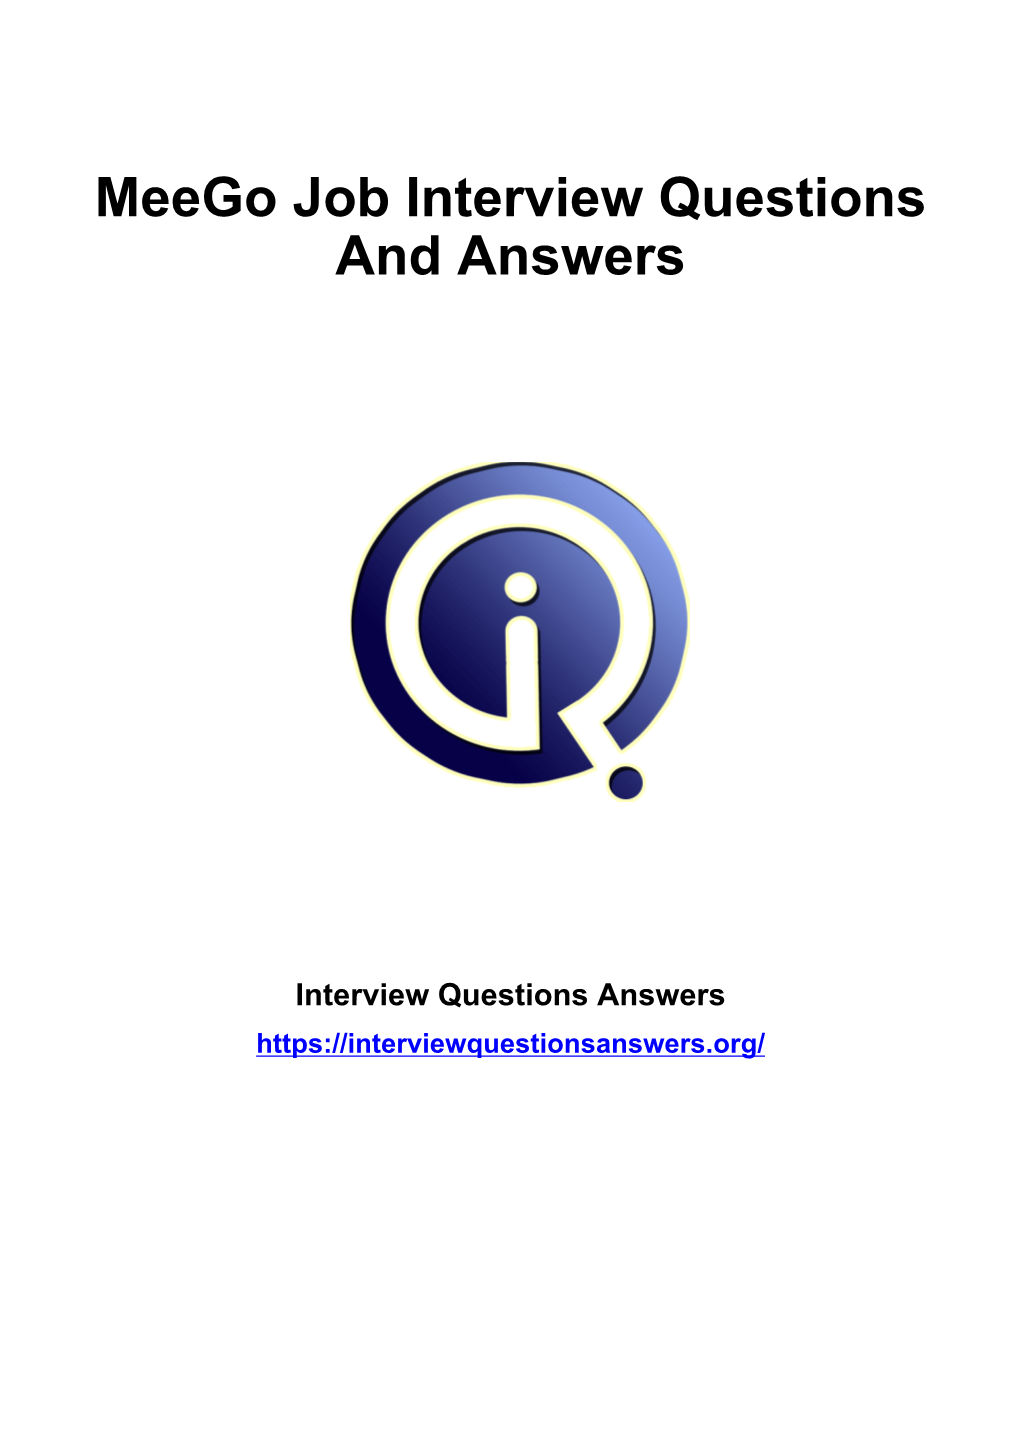 Meego Job Interview Questions and Answers